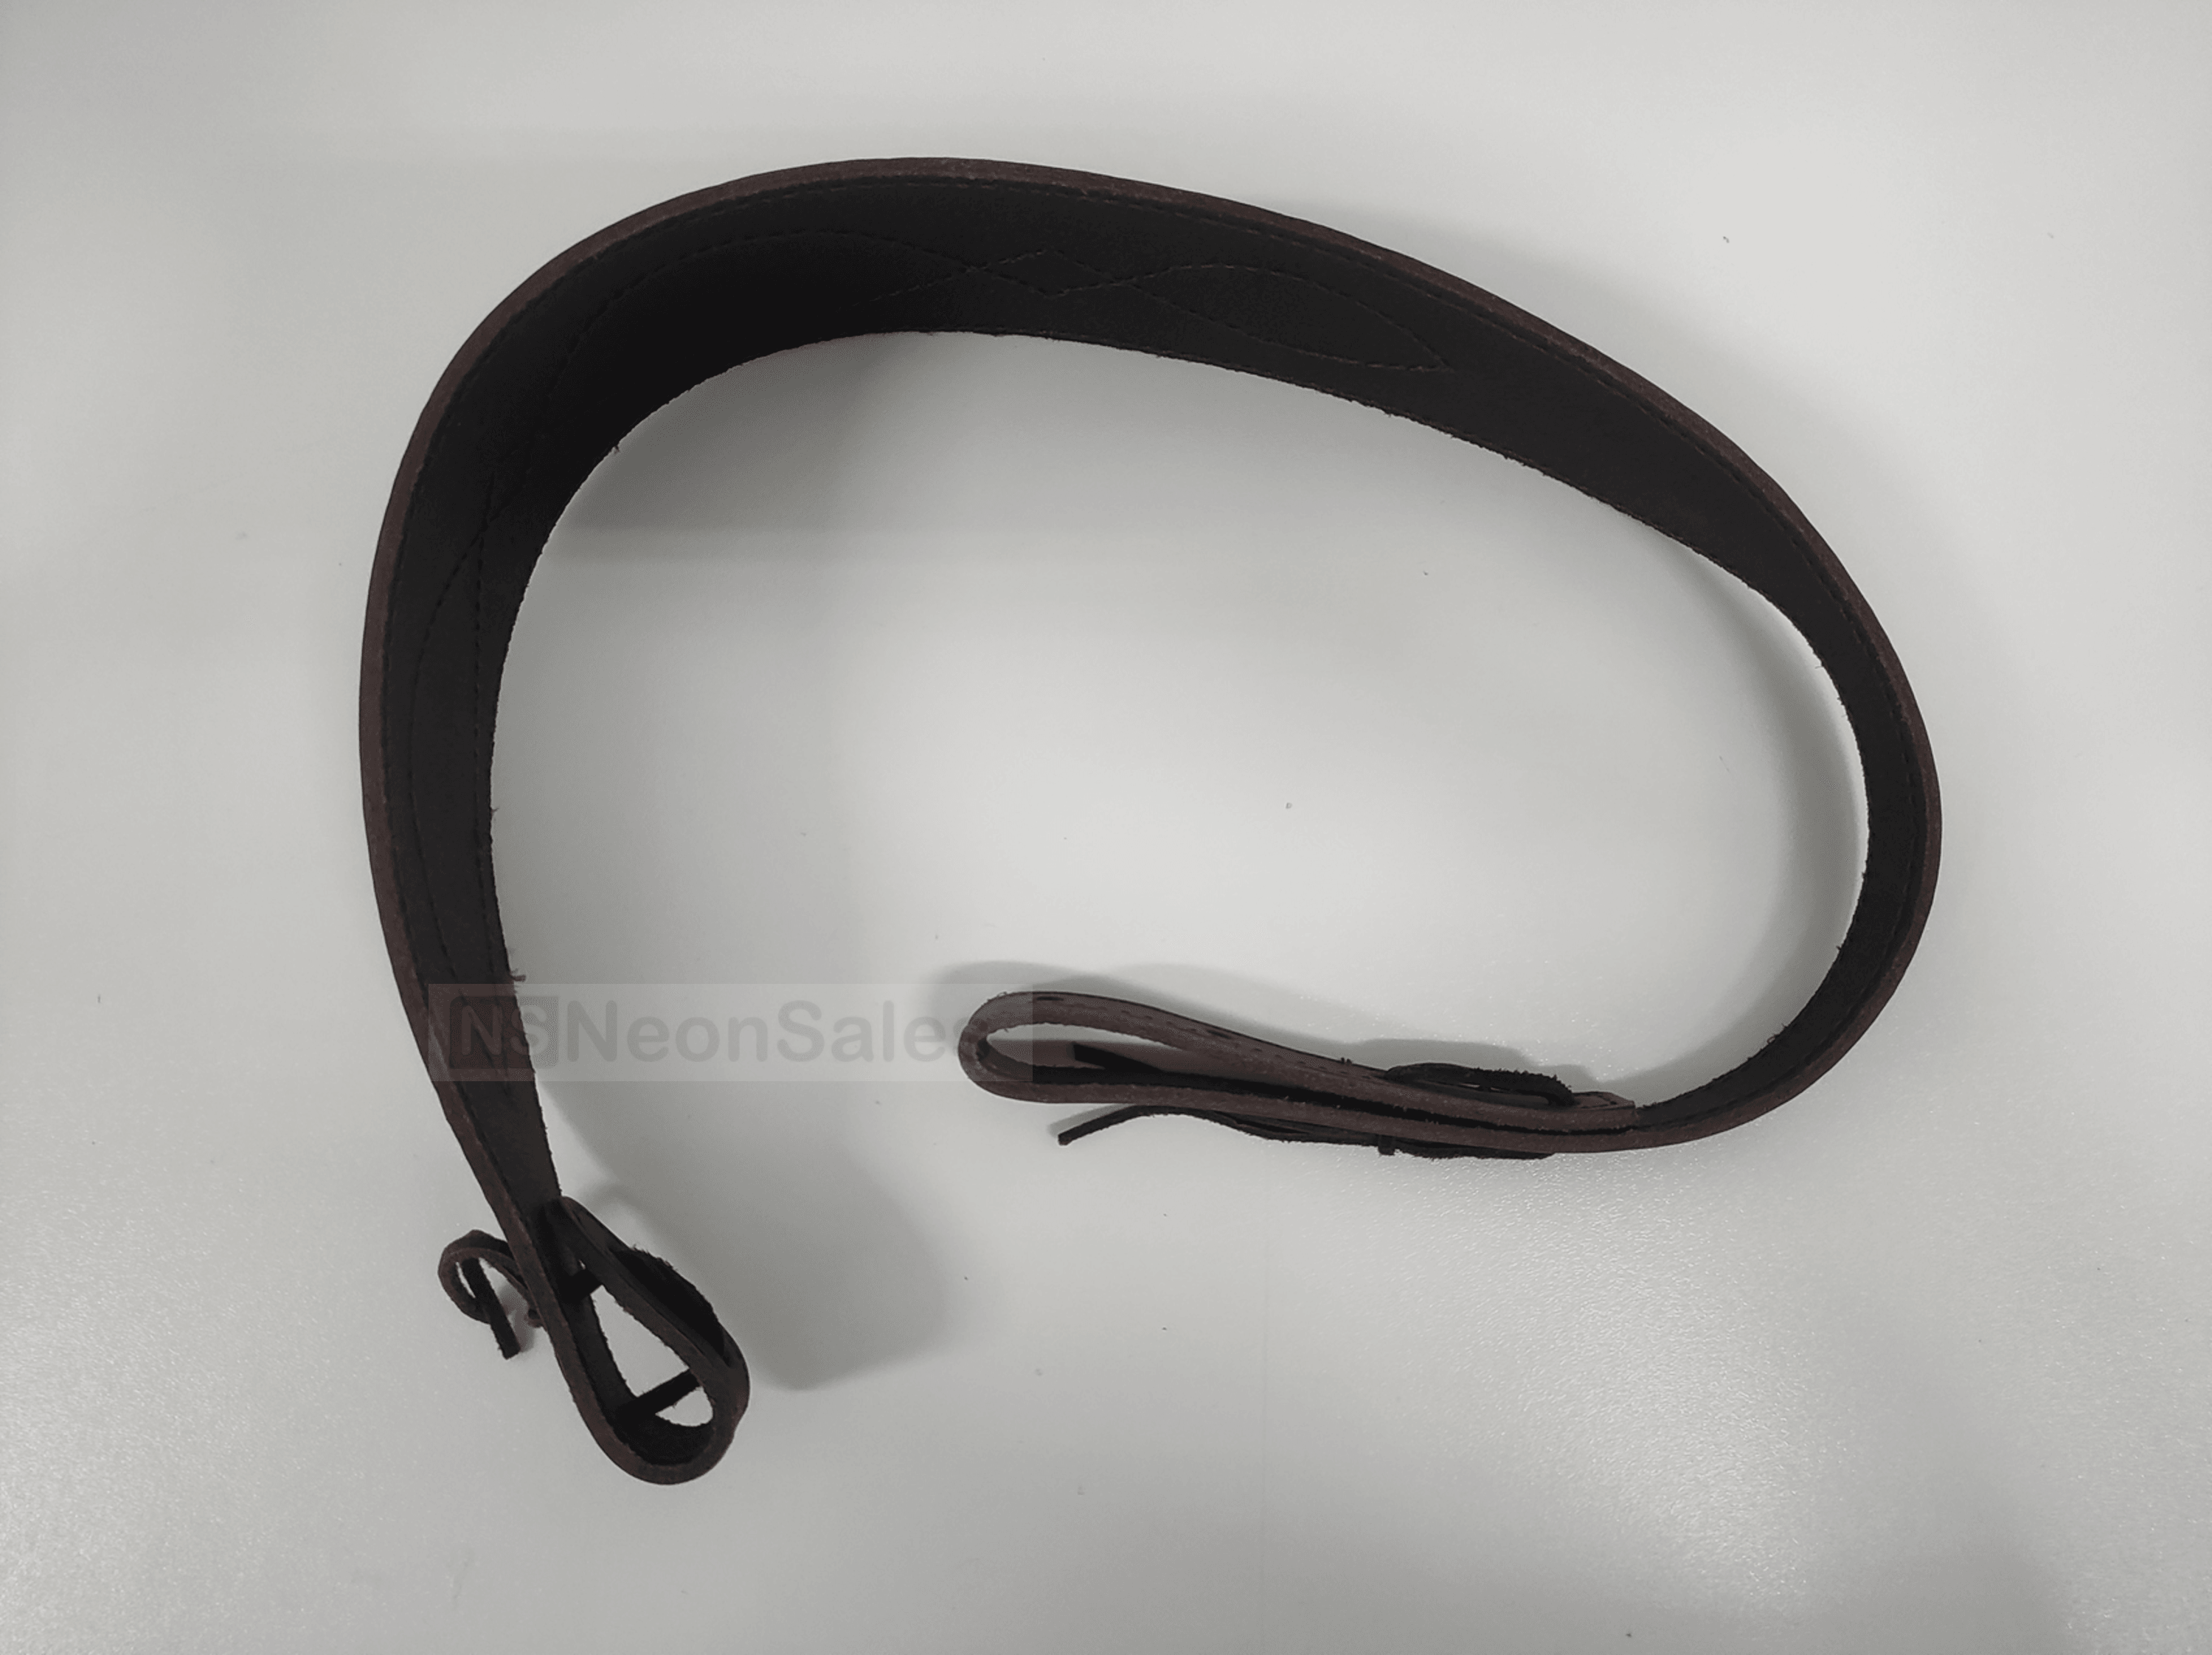 TWO POINT COBRA LEATHER RIFLE SLING - NeonSales South Africa